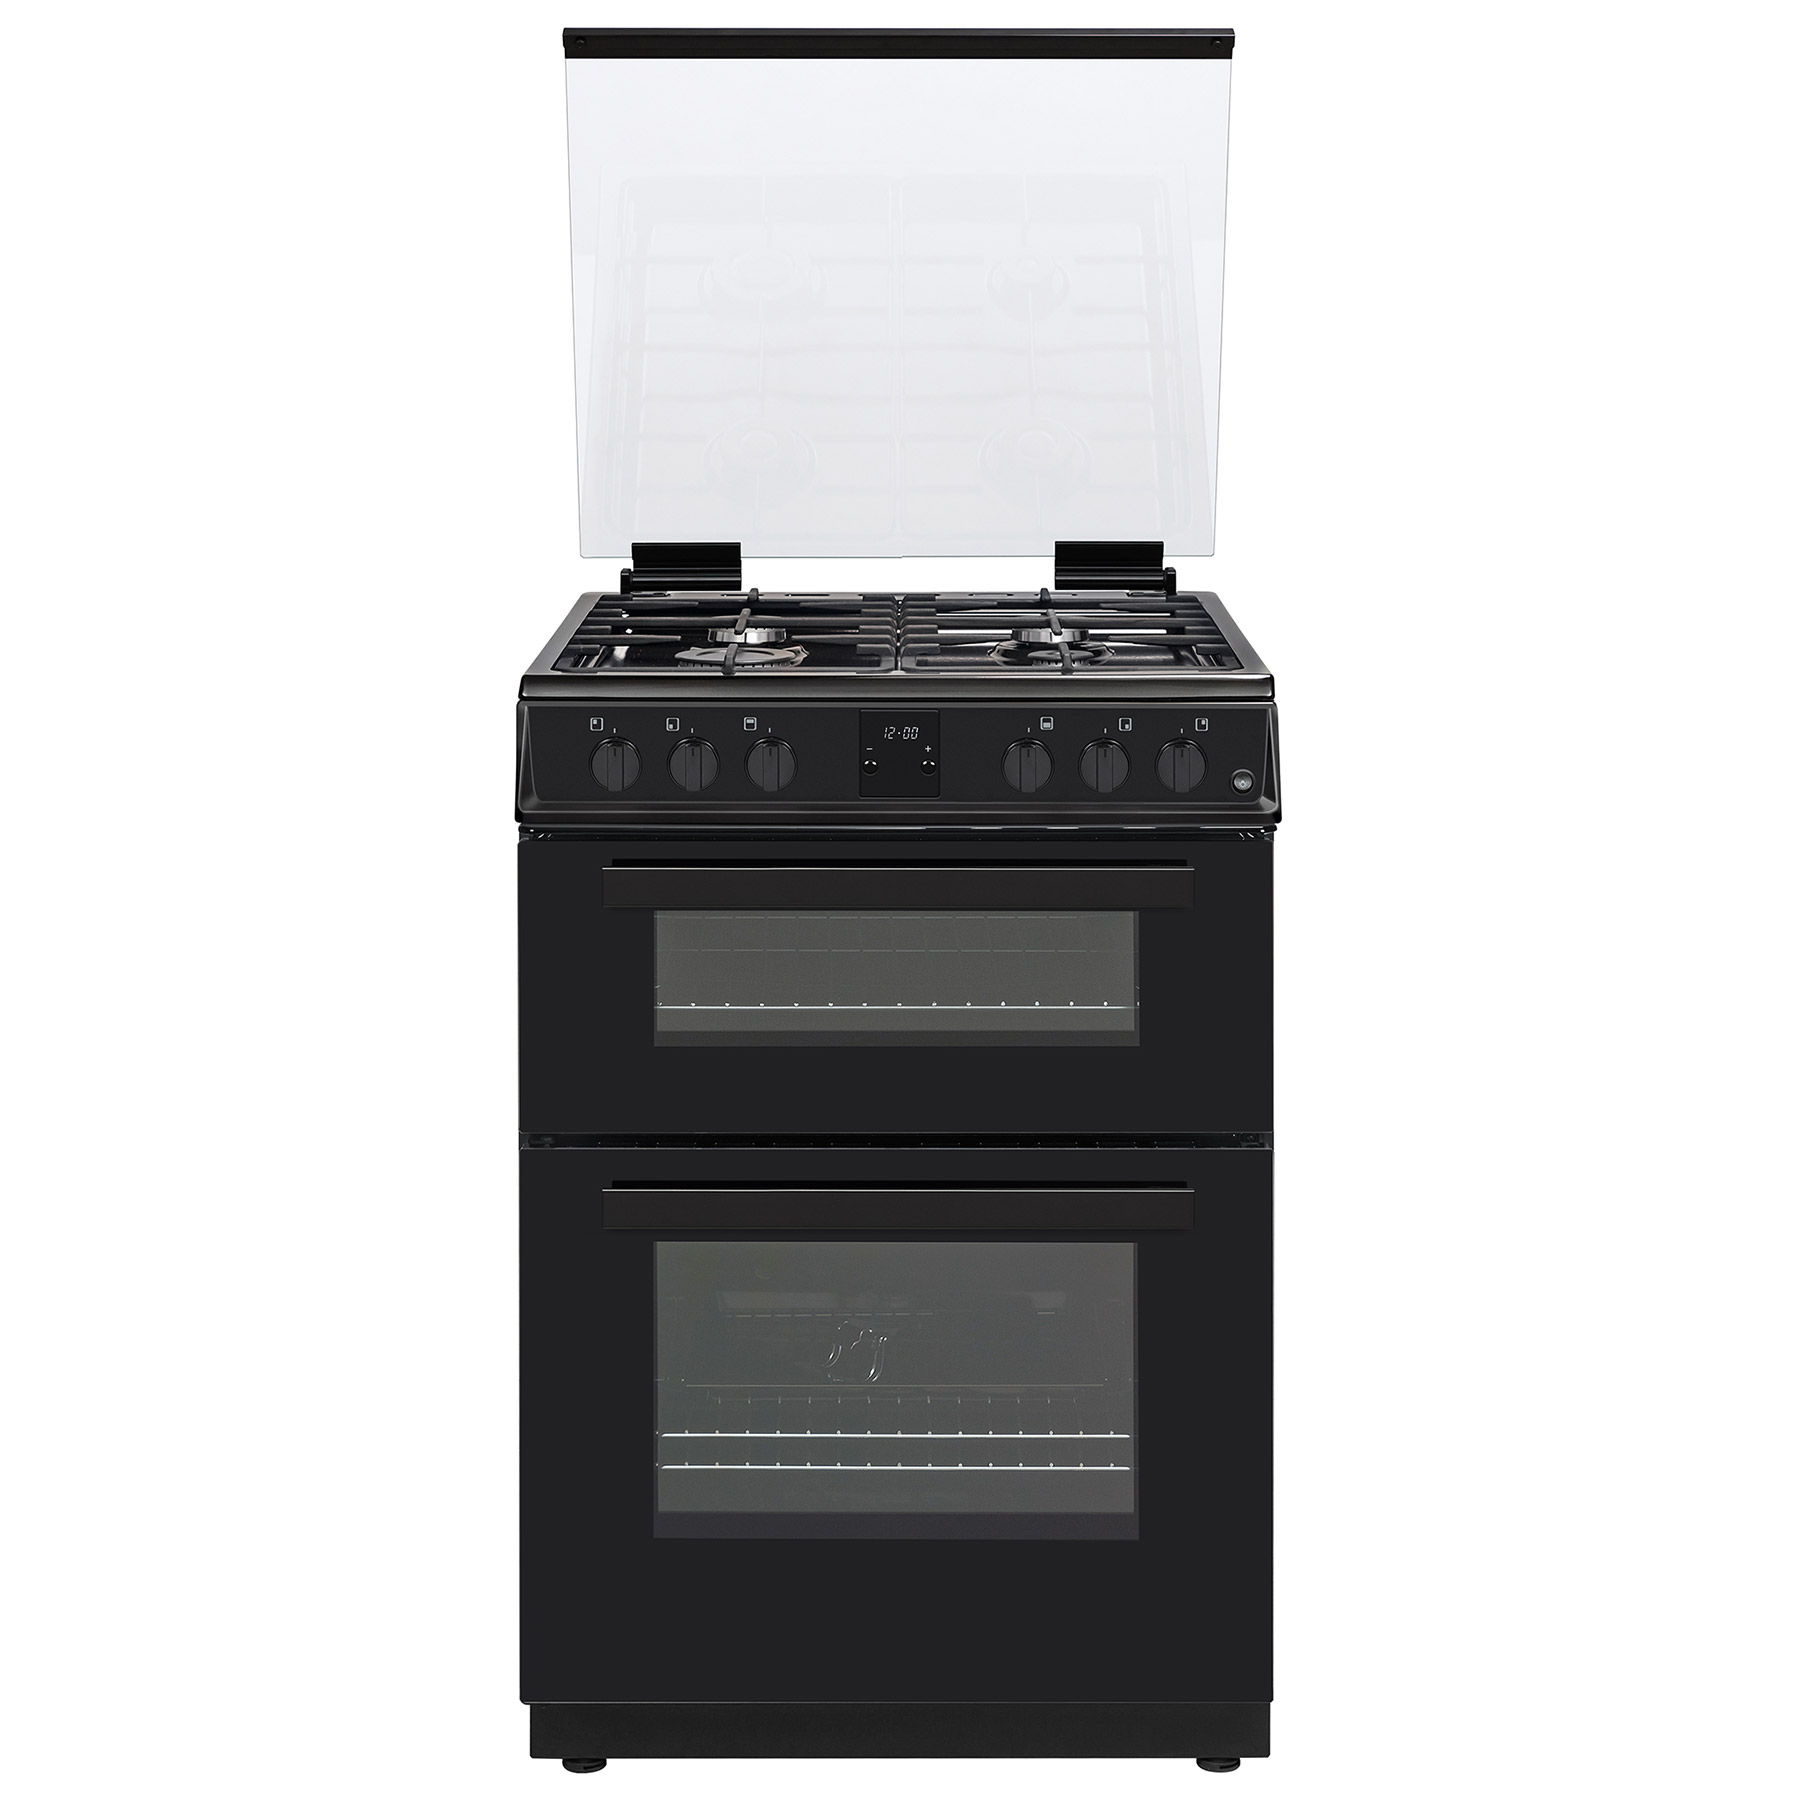 Image of Hostess DOG60B 60cm Double Oven Gas Cooker in Black Glass Lid 25 71L